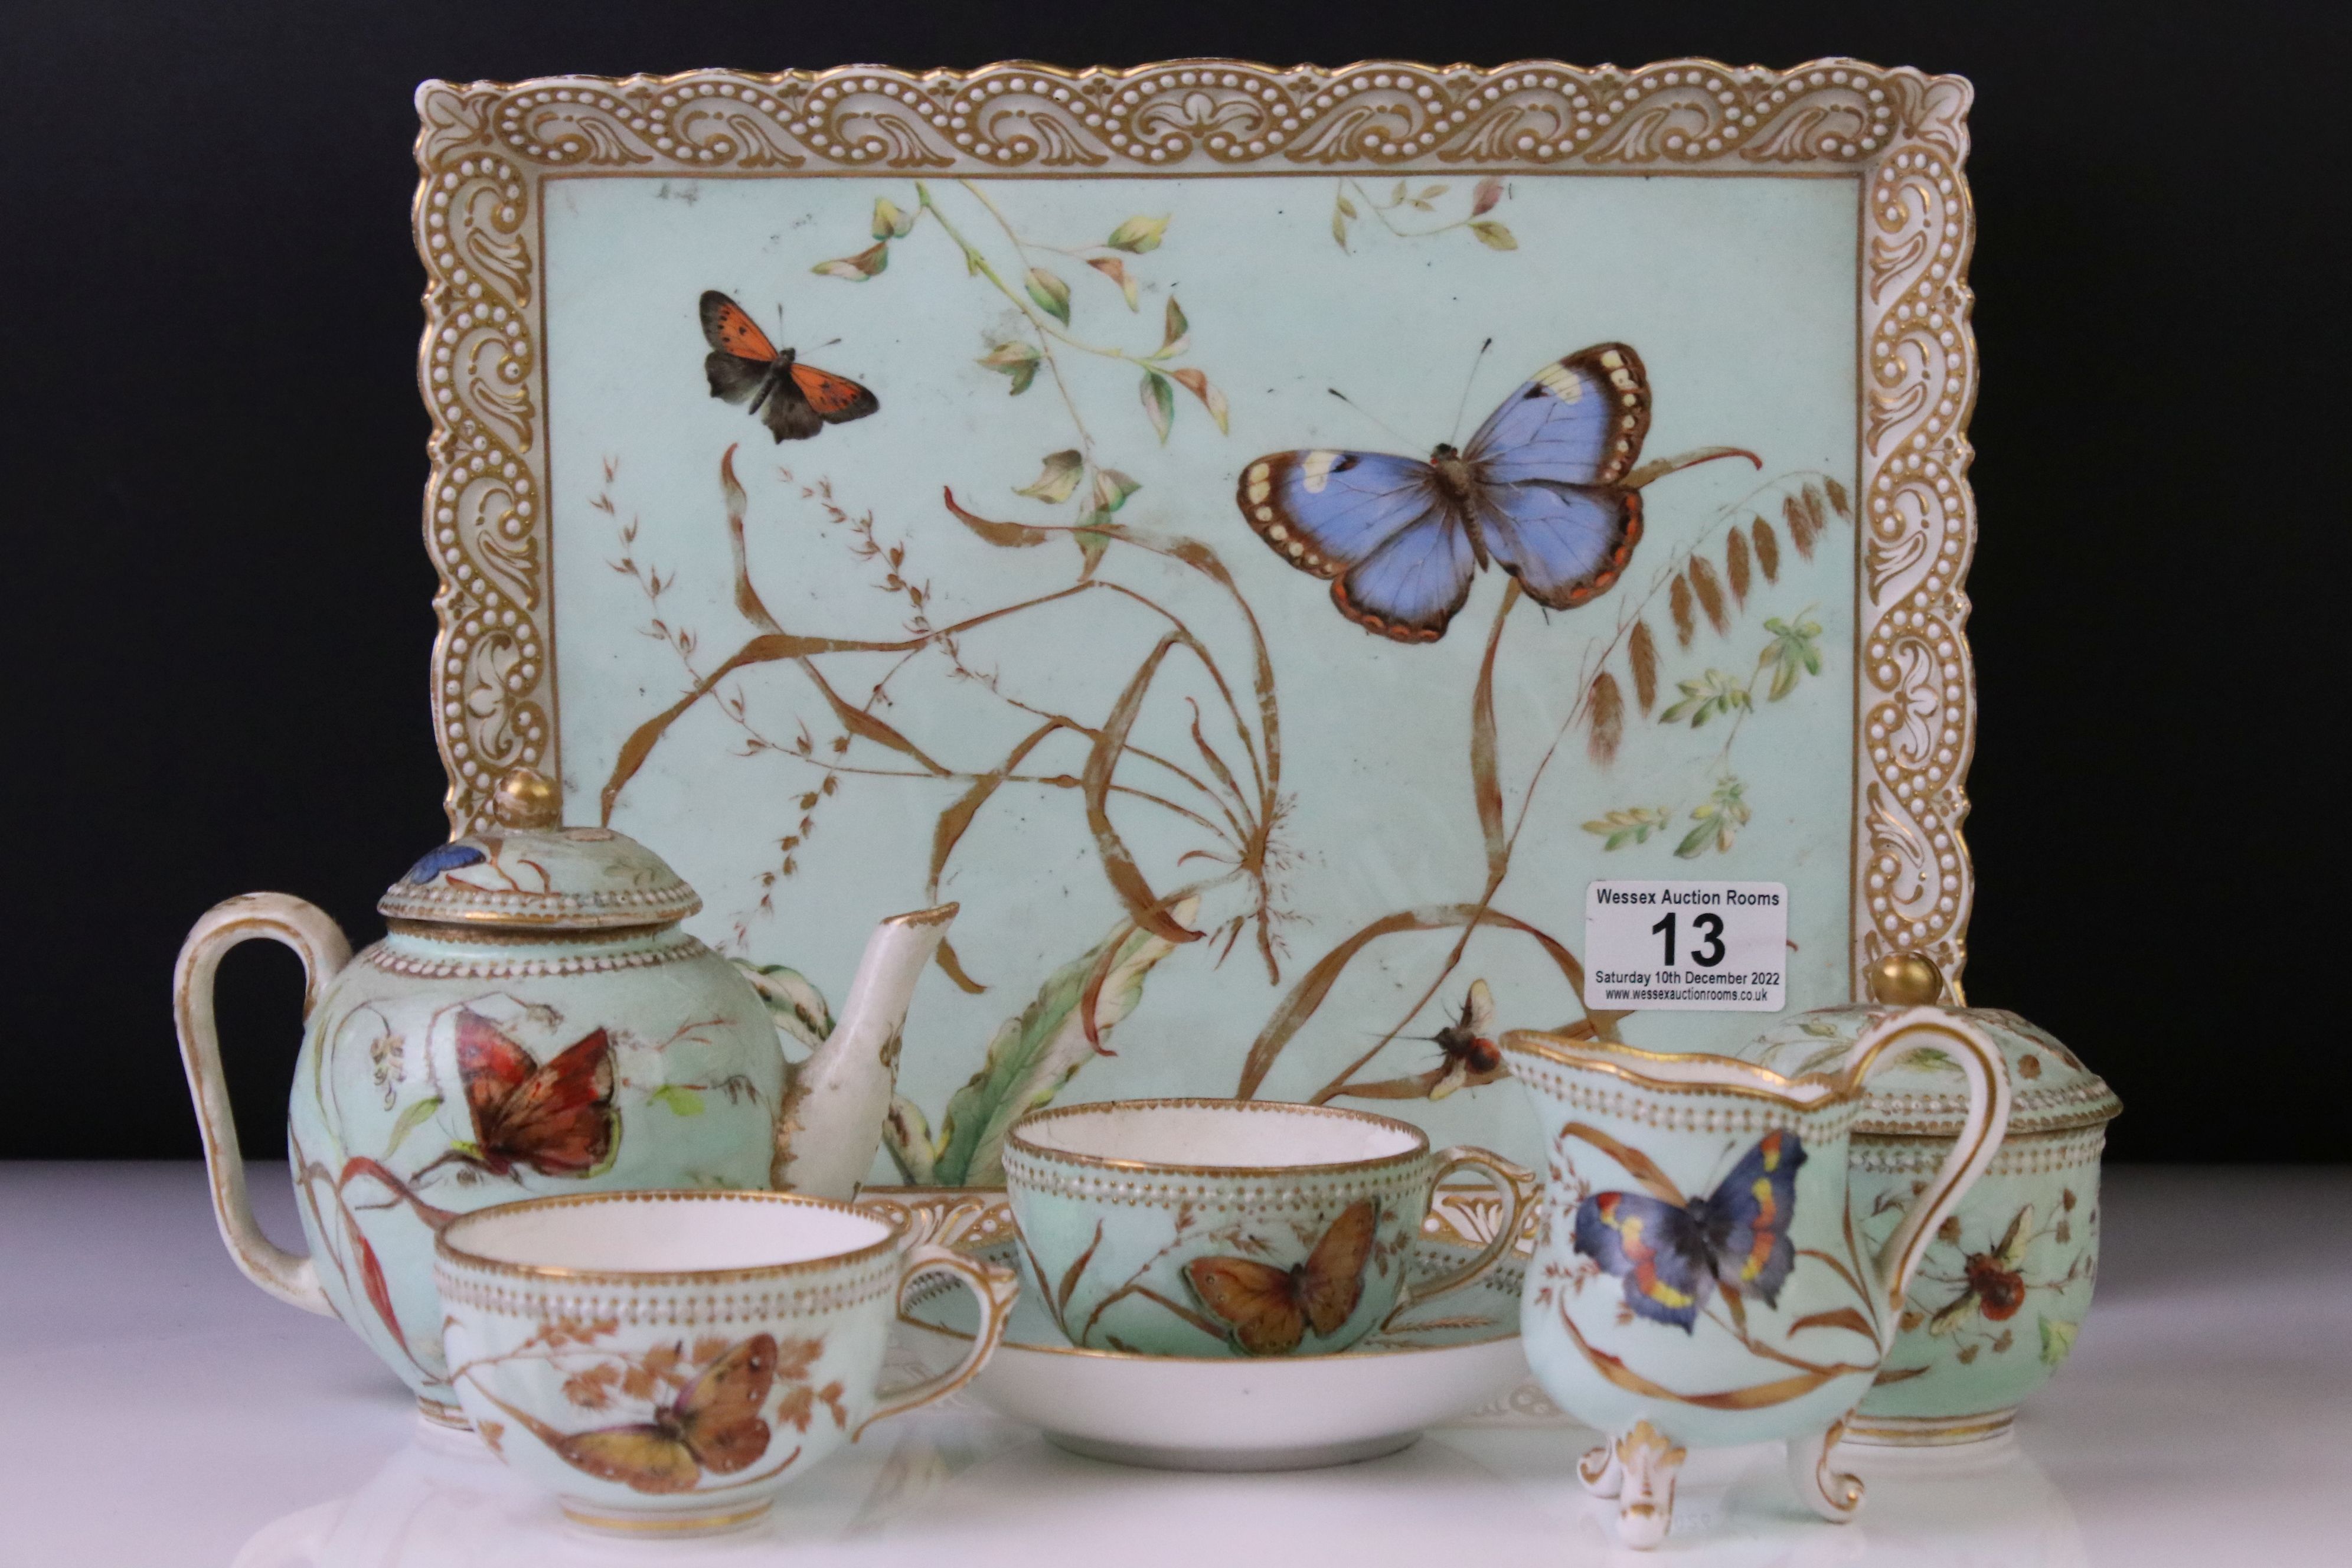 Royal Worcester porcelain cabaret tea set with hand painted butterfly, floral and foliate